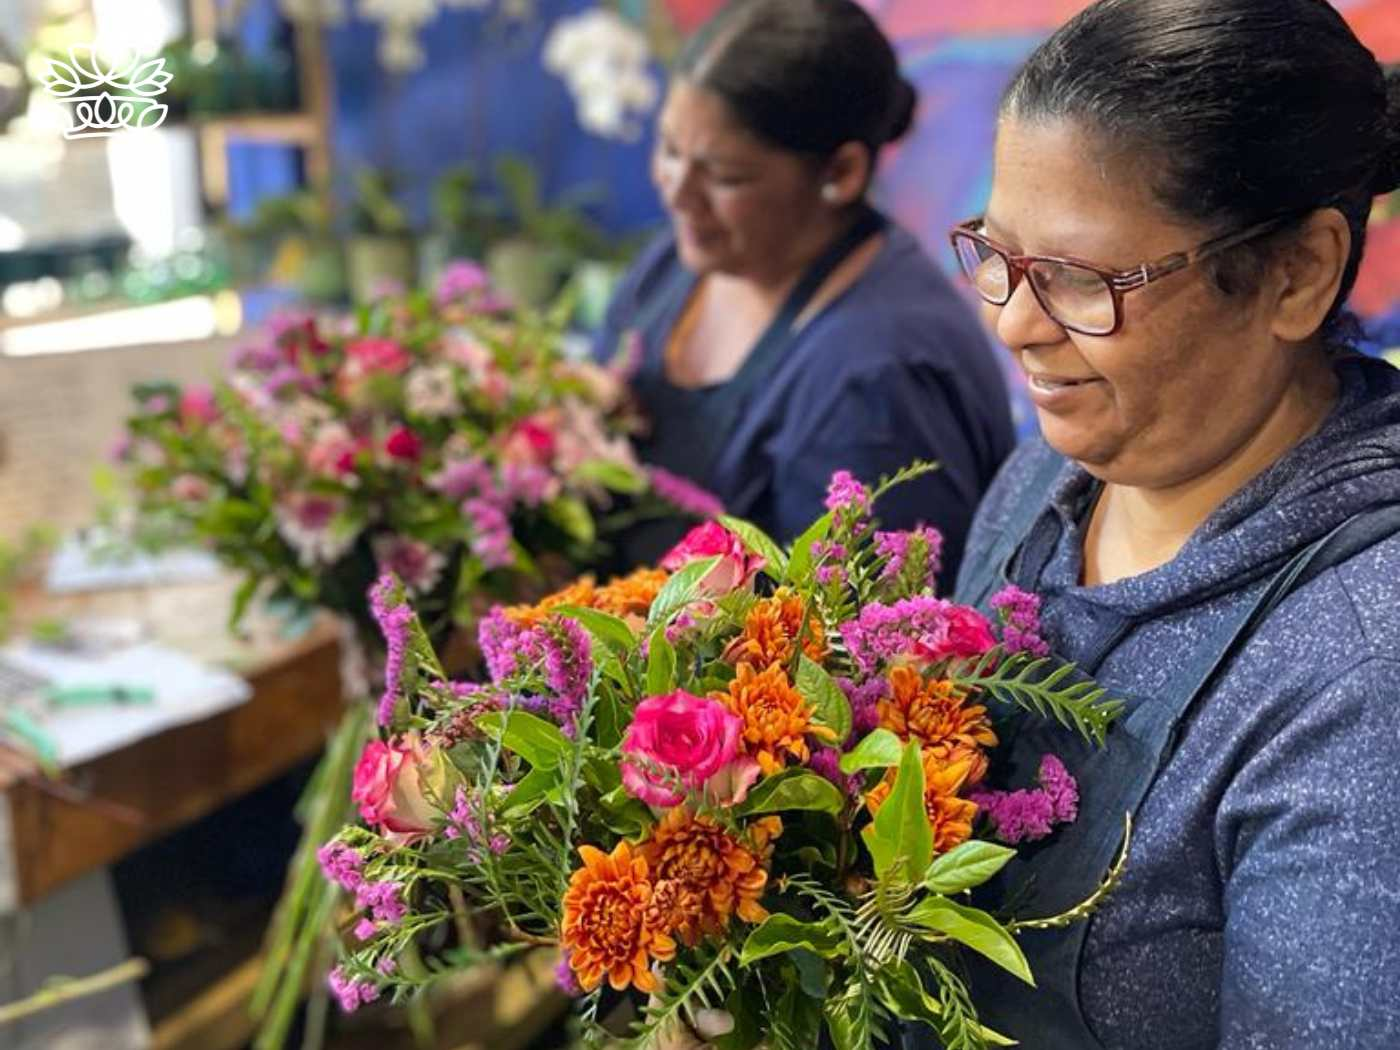 Skilled florists arranging vibrant blooms for Mother's Day, part of the Flower Bouquets Collection at Fabulous Flowers and Gifts, delivered with heart and soul.